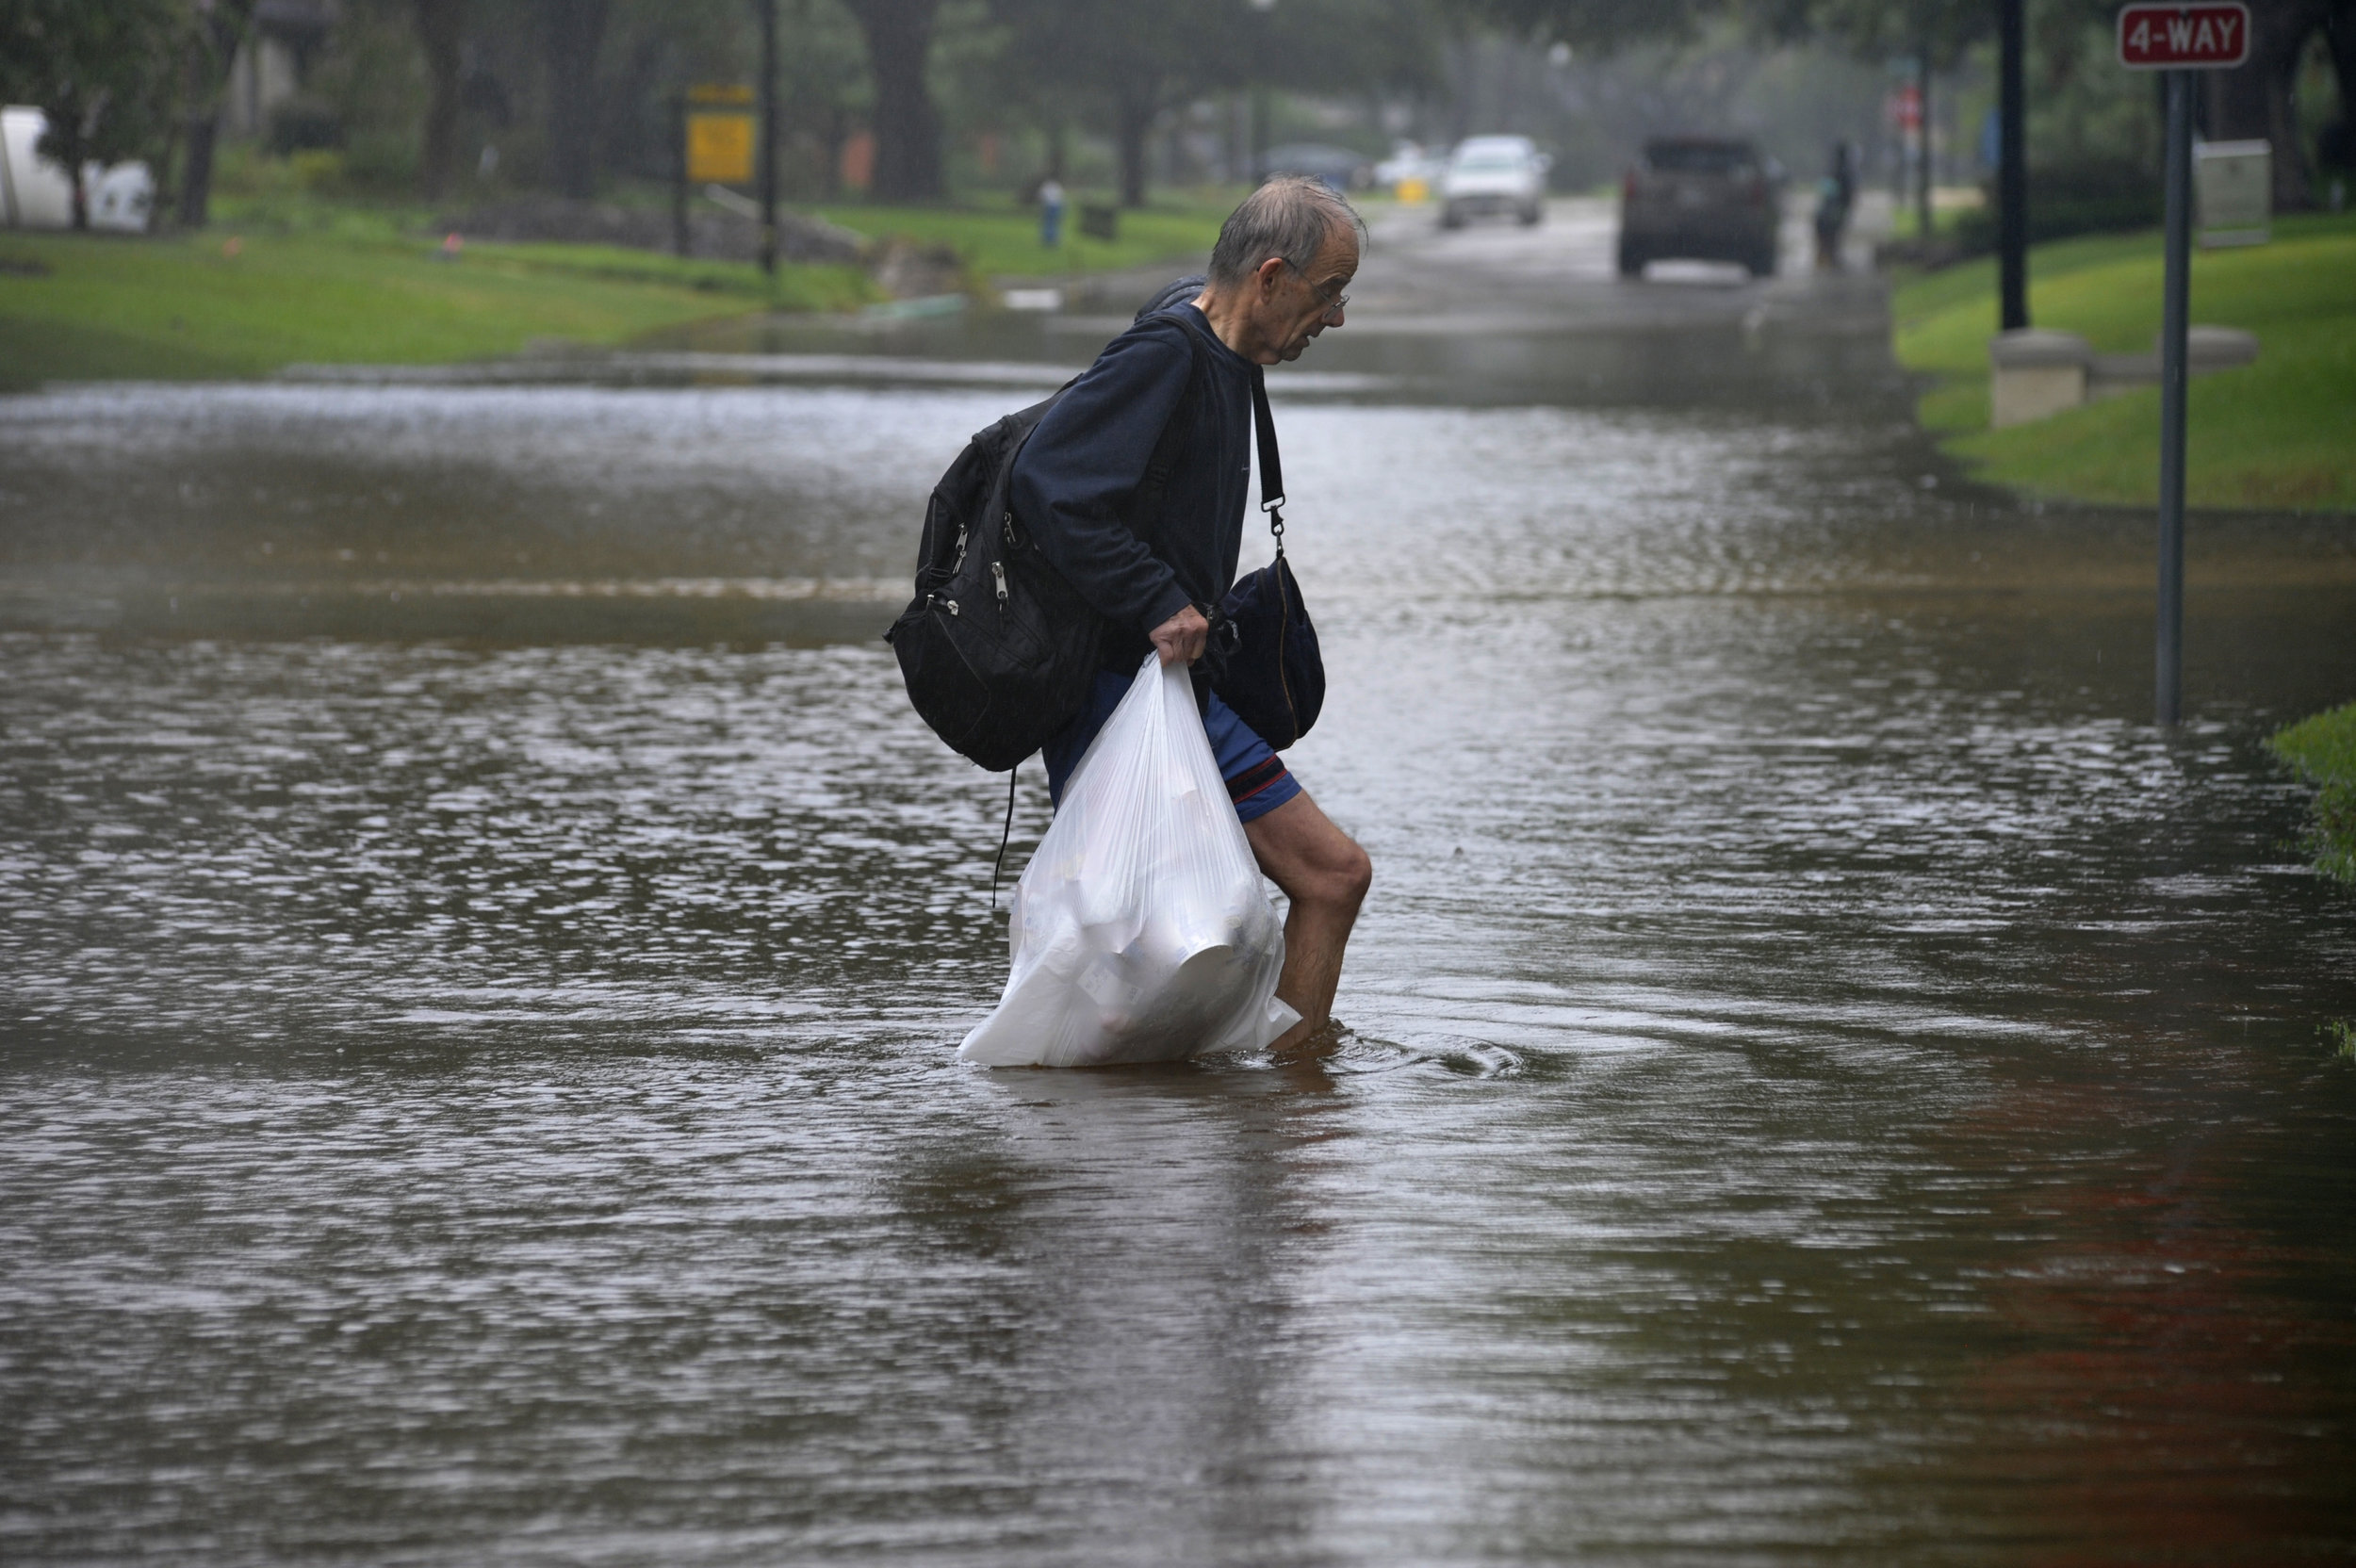  A man carries his belongings through flood waters after Hurricane Harvey inundated the Texas Gulf coast with rain causing widespread flooding, in Houston, Texas, U.S. August 28, 2017.  REUTERS/Nick Oxford 